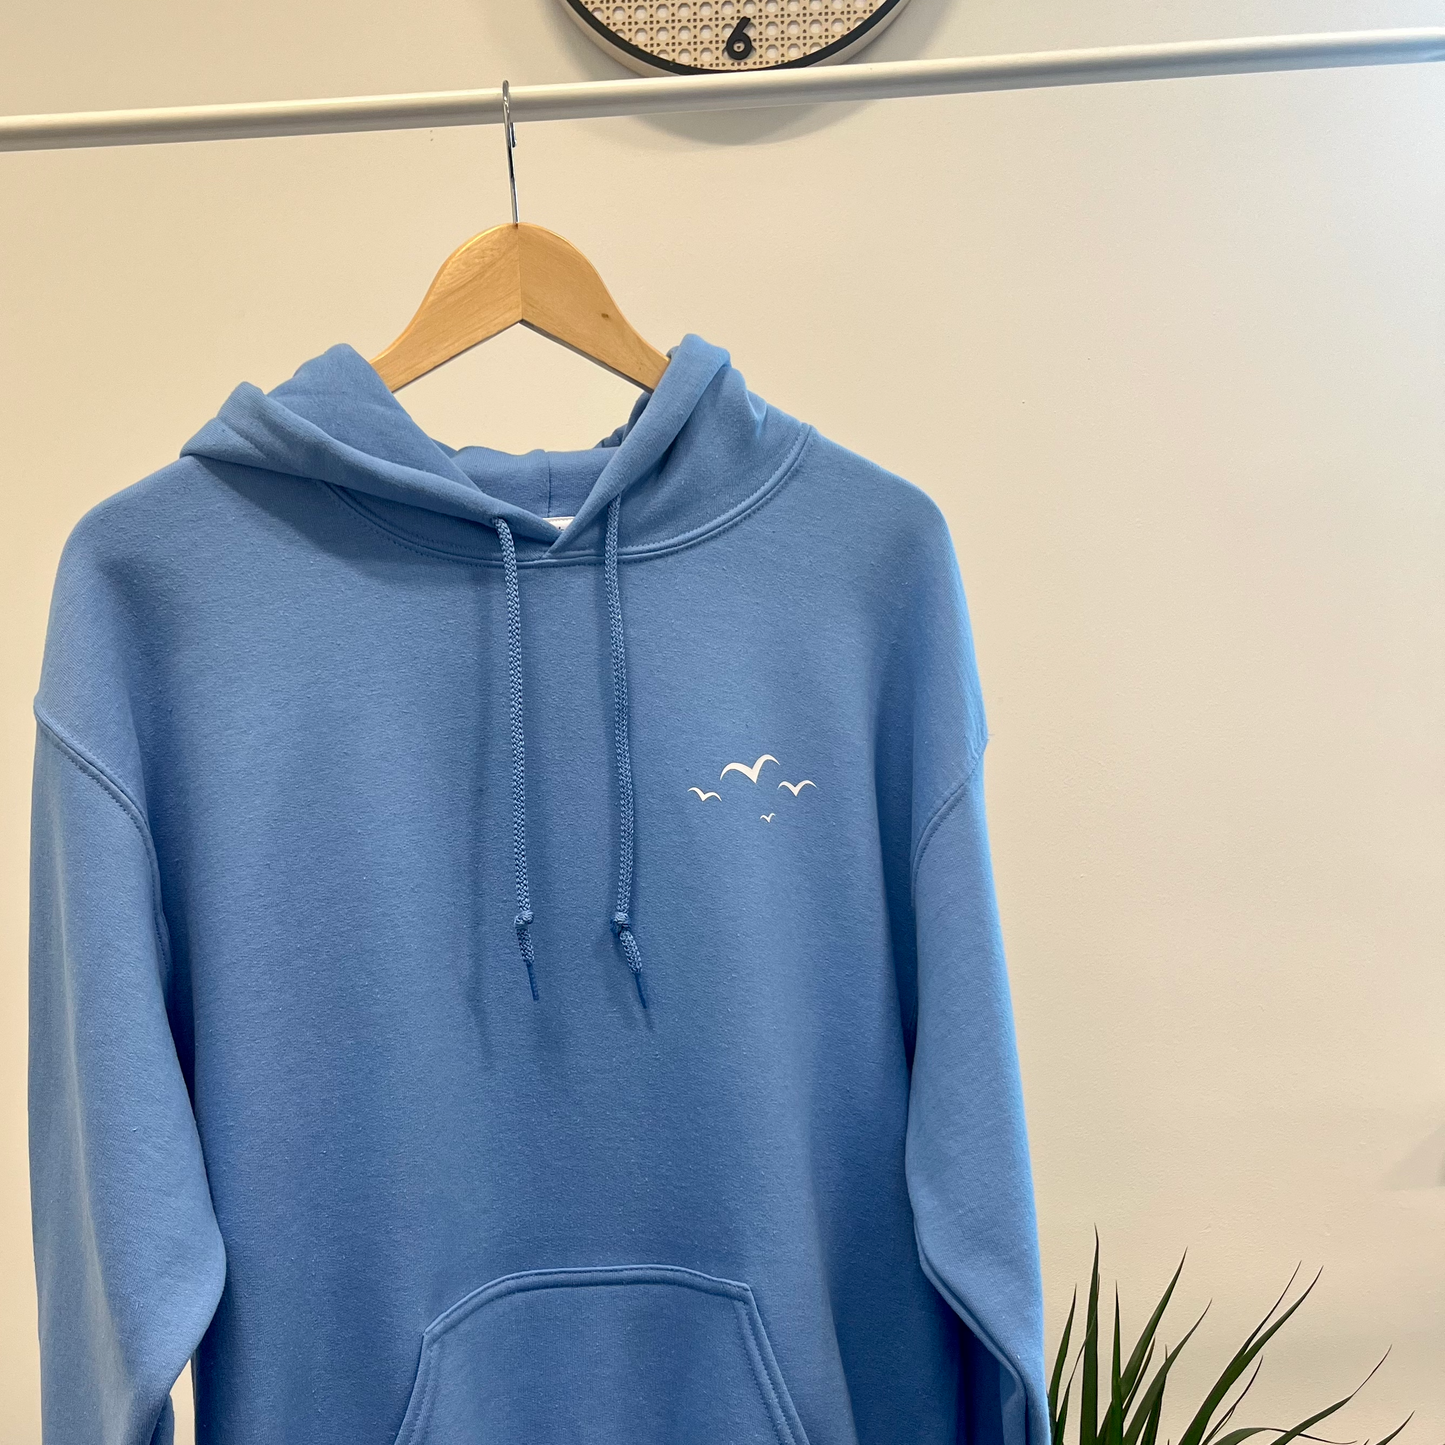 IF YOU'RE FOND OF SAND DUNES HOODIE. Blue with white print.